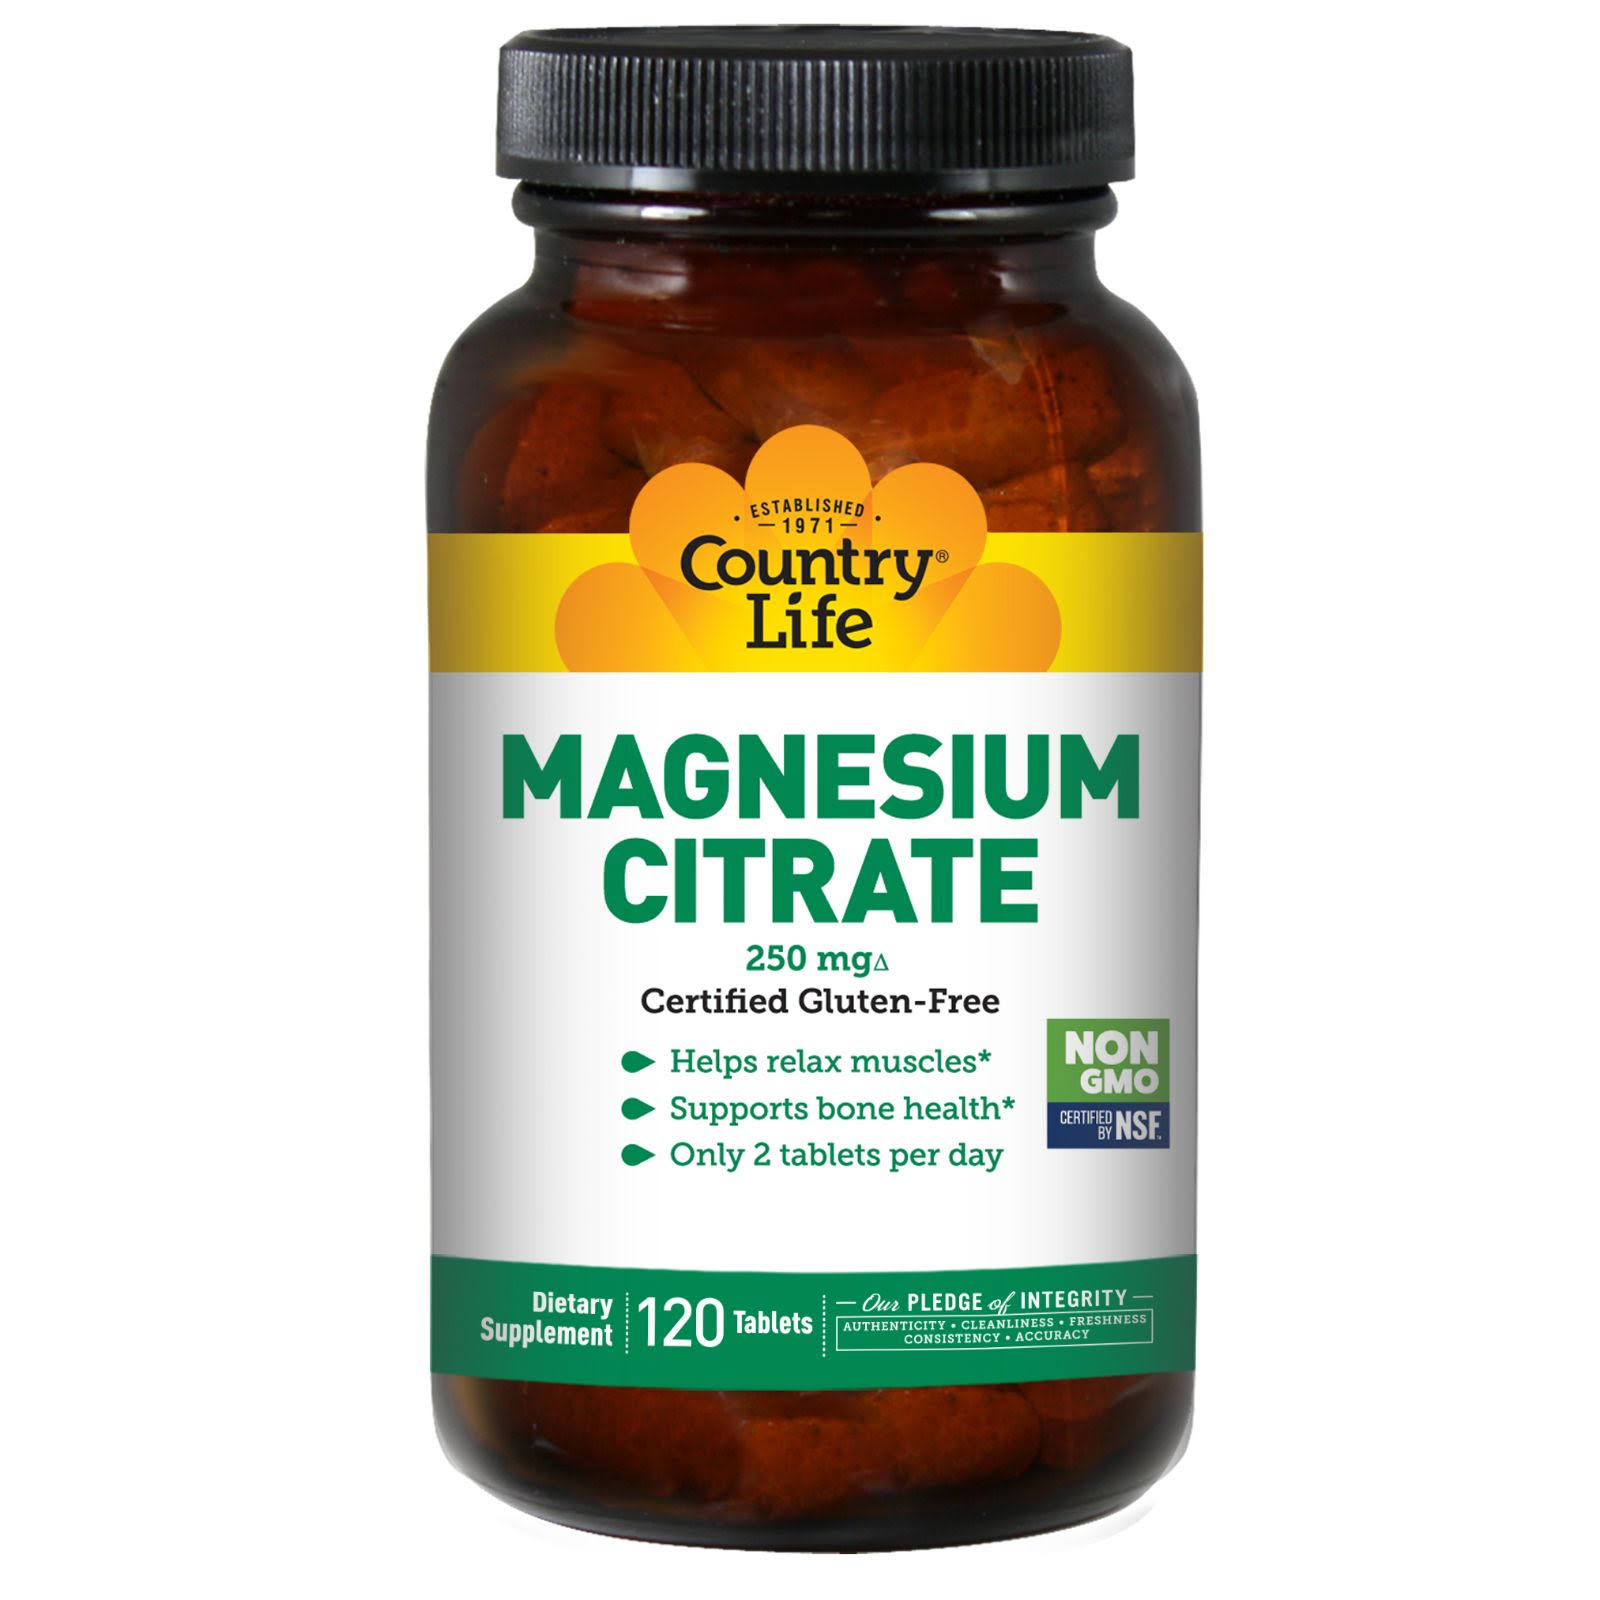 Country Life - Magnesium Citrate, 250 MG - 120 Tablets